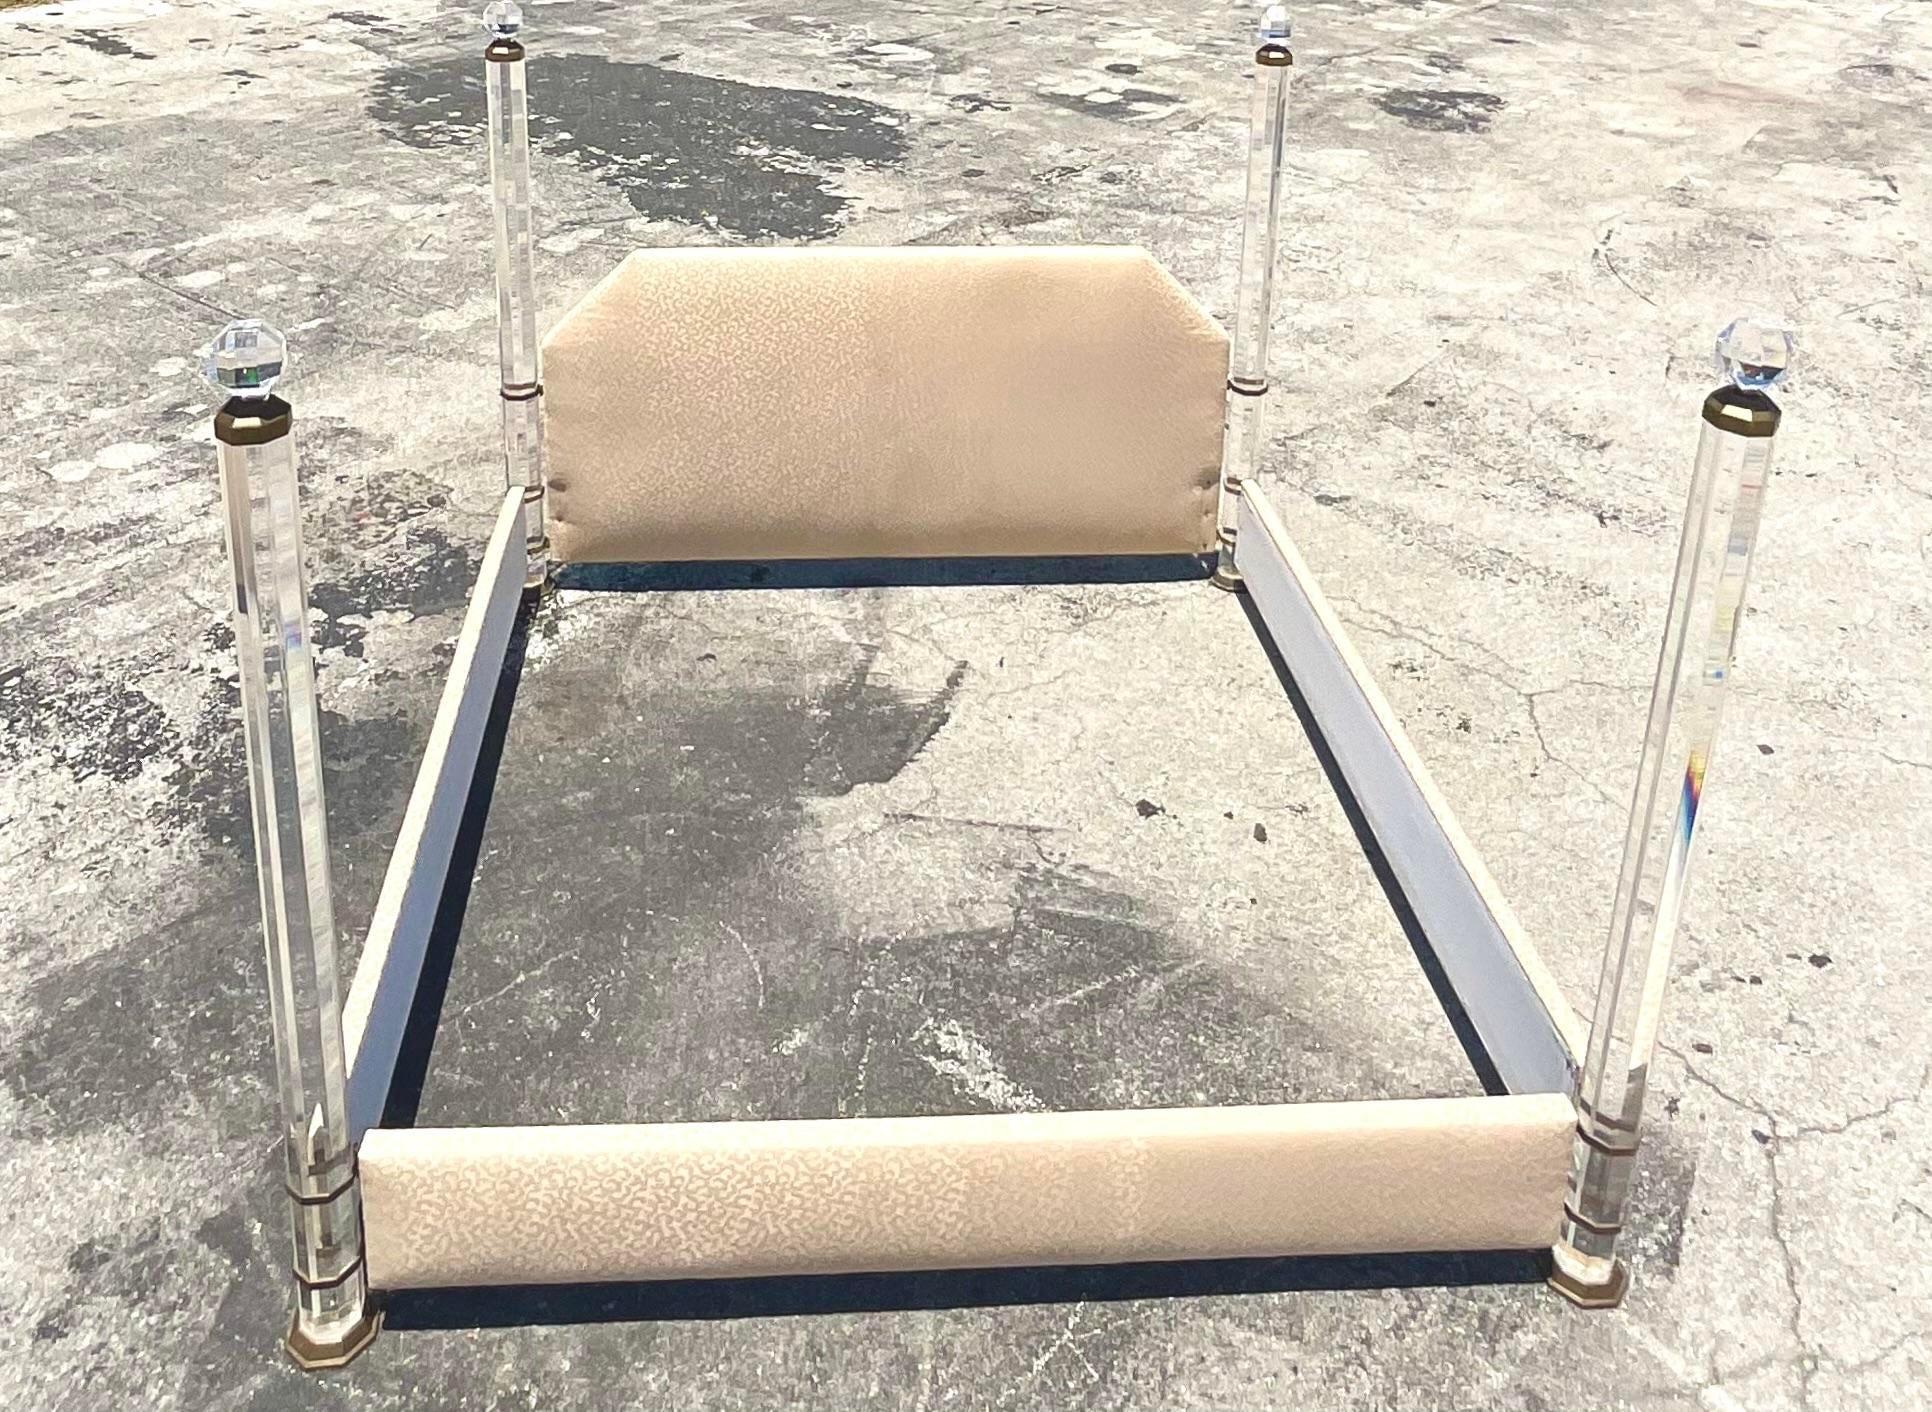 Fantastic vintage Contemporary King bed frame. Stunning lucite four poster bed with heavy brass details. Faceted posts for extra light movement. Beau trap cheetah print upholstery. Done in the manner of Charles Hollis Jones. Acquired from a Palm